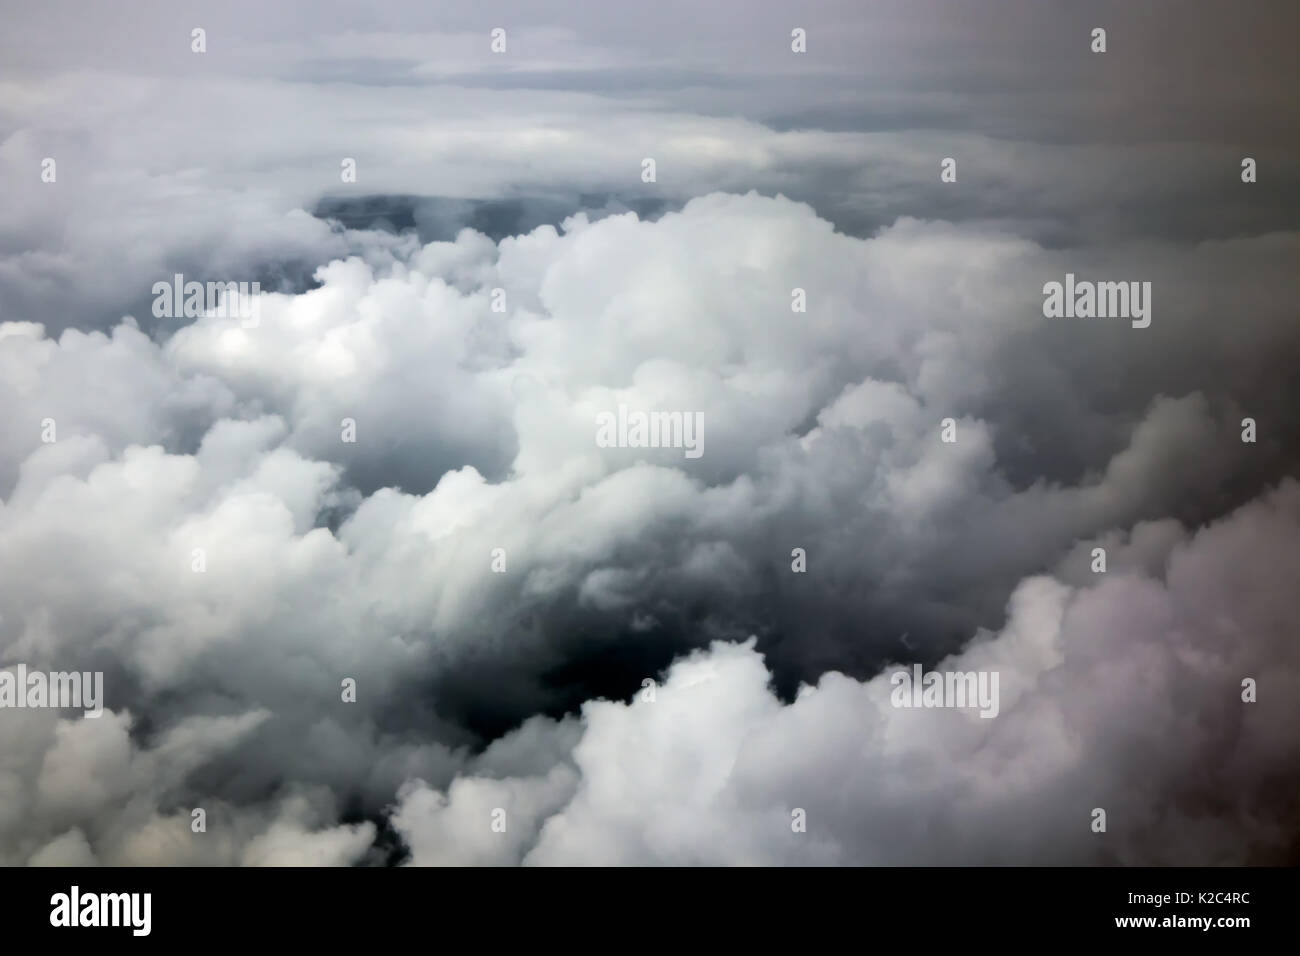 The dramatic sky with clouds made from a window of an airplane. Stock Photo